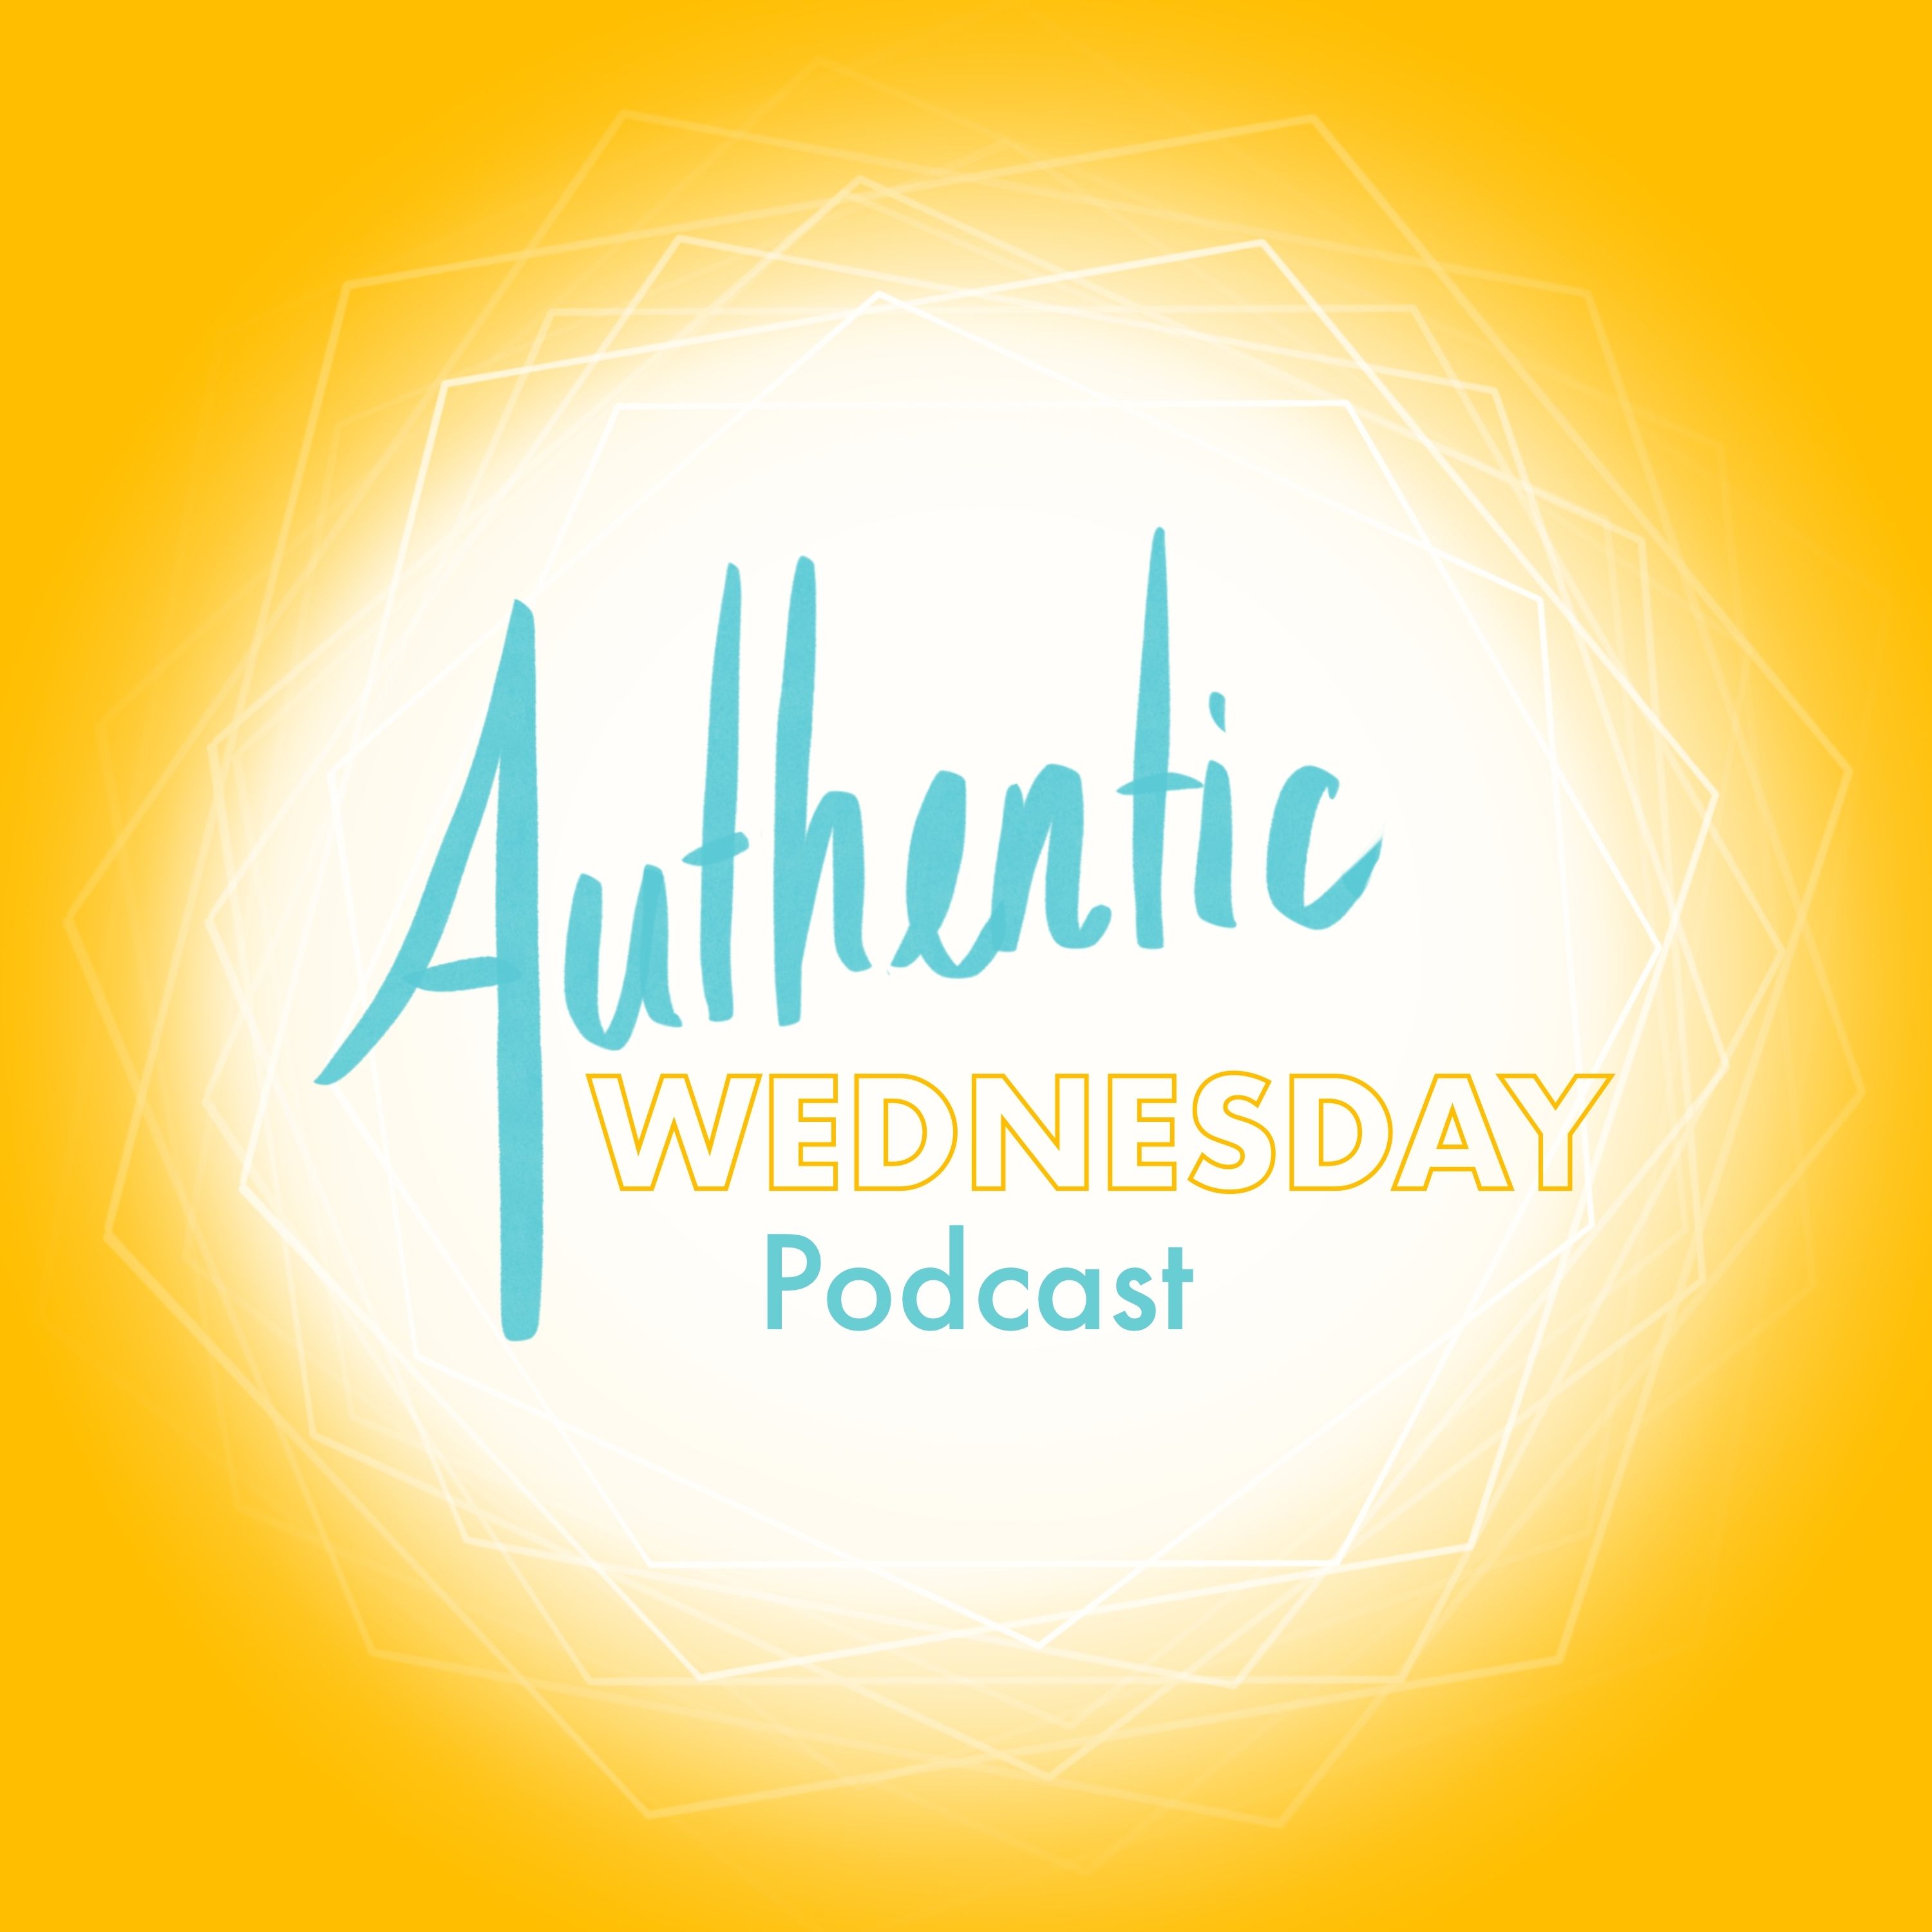 Artwork for podcast Authentic Wednesday Podcast